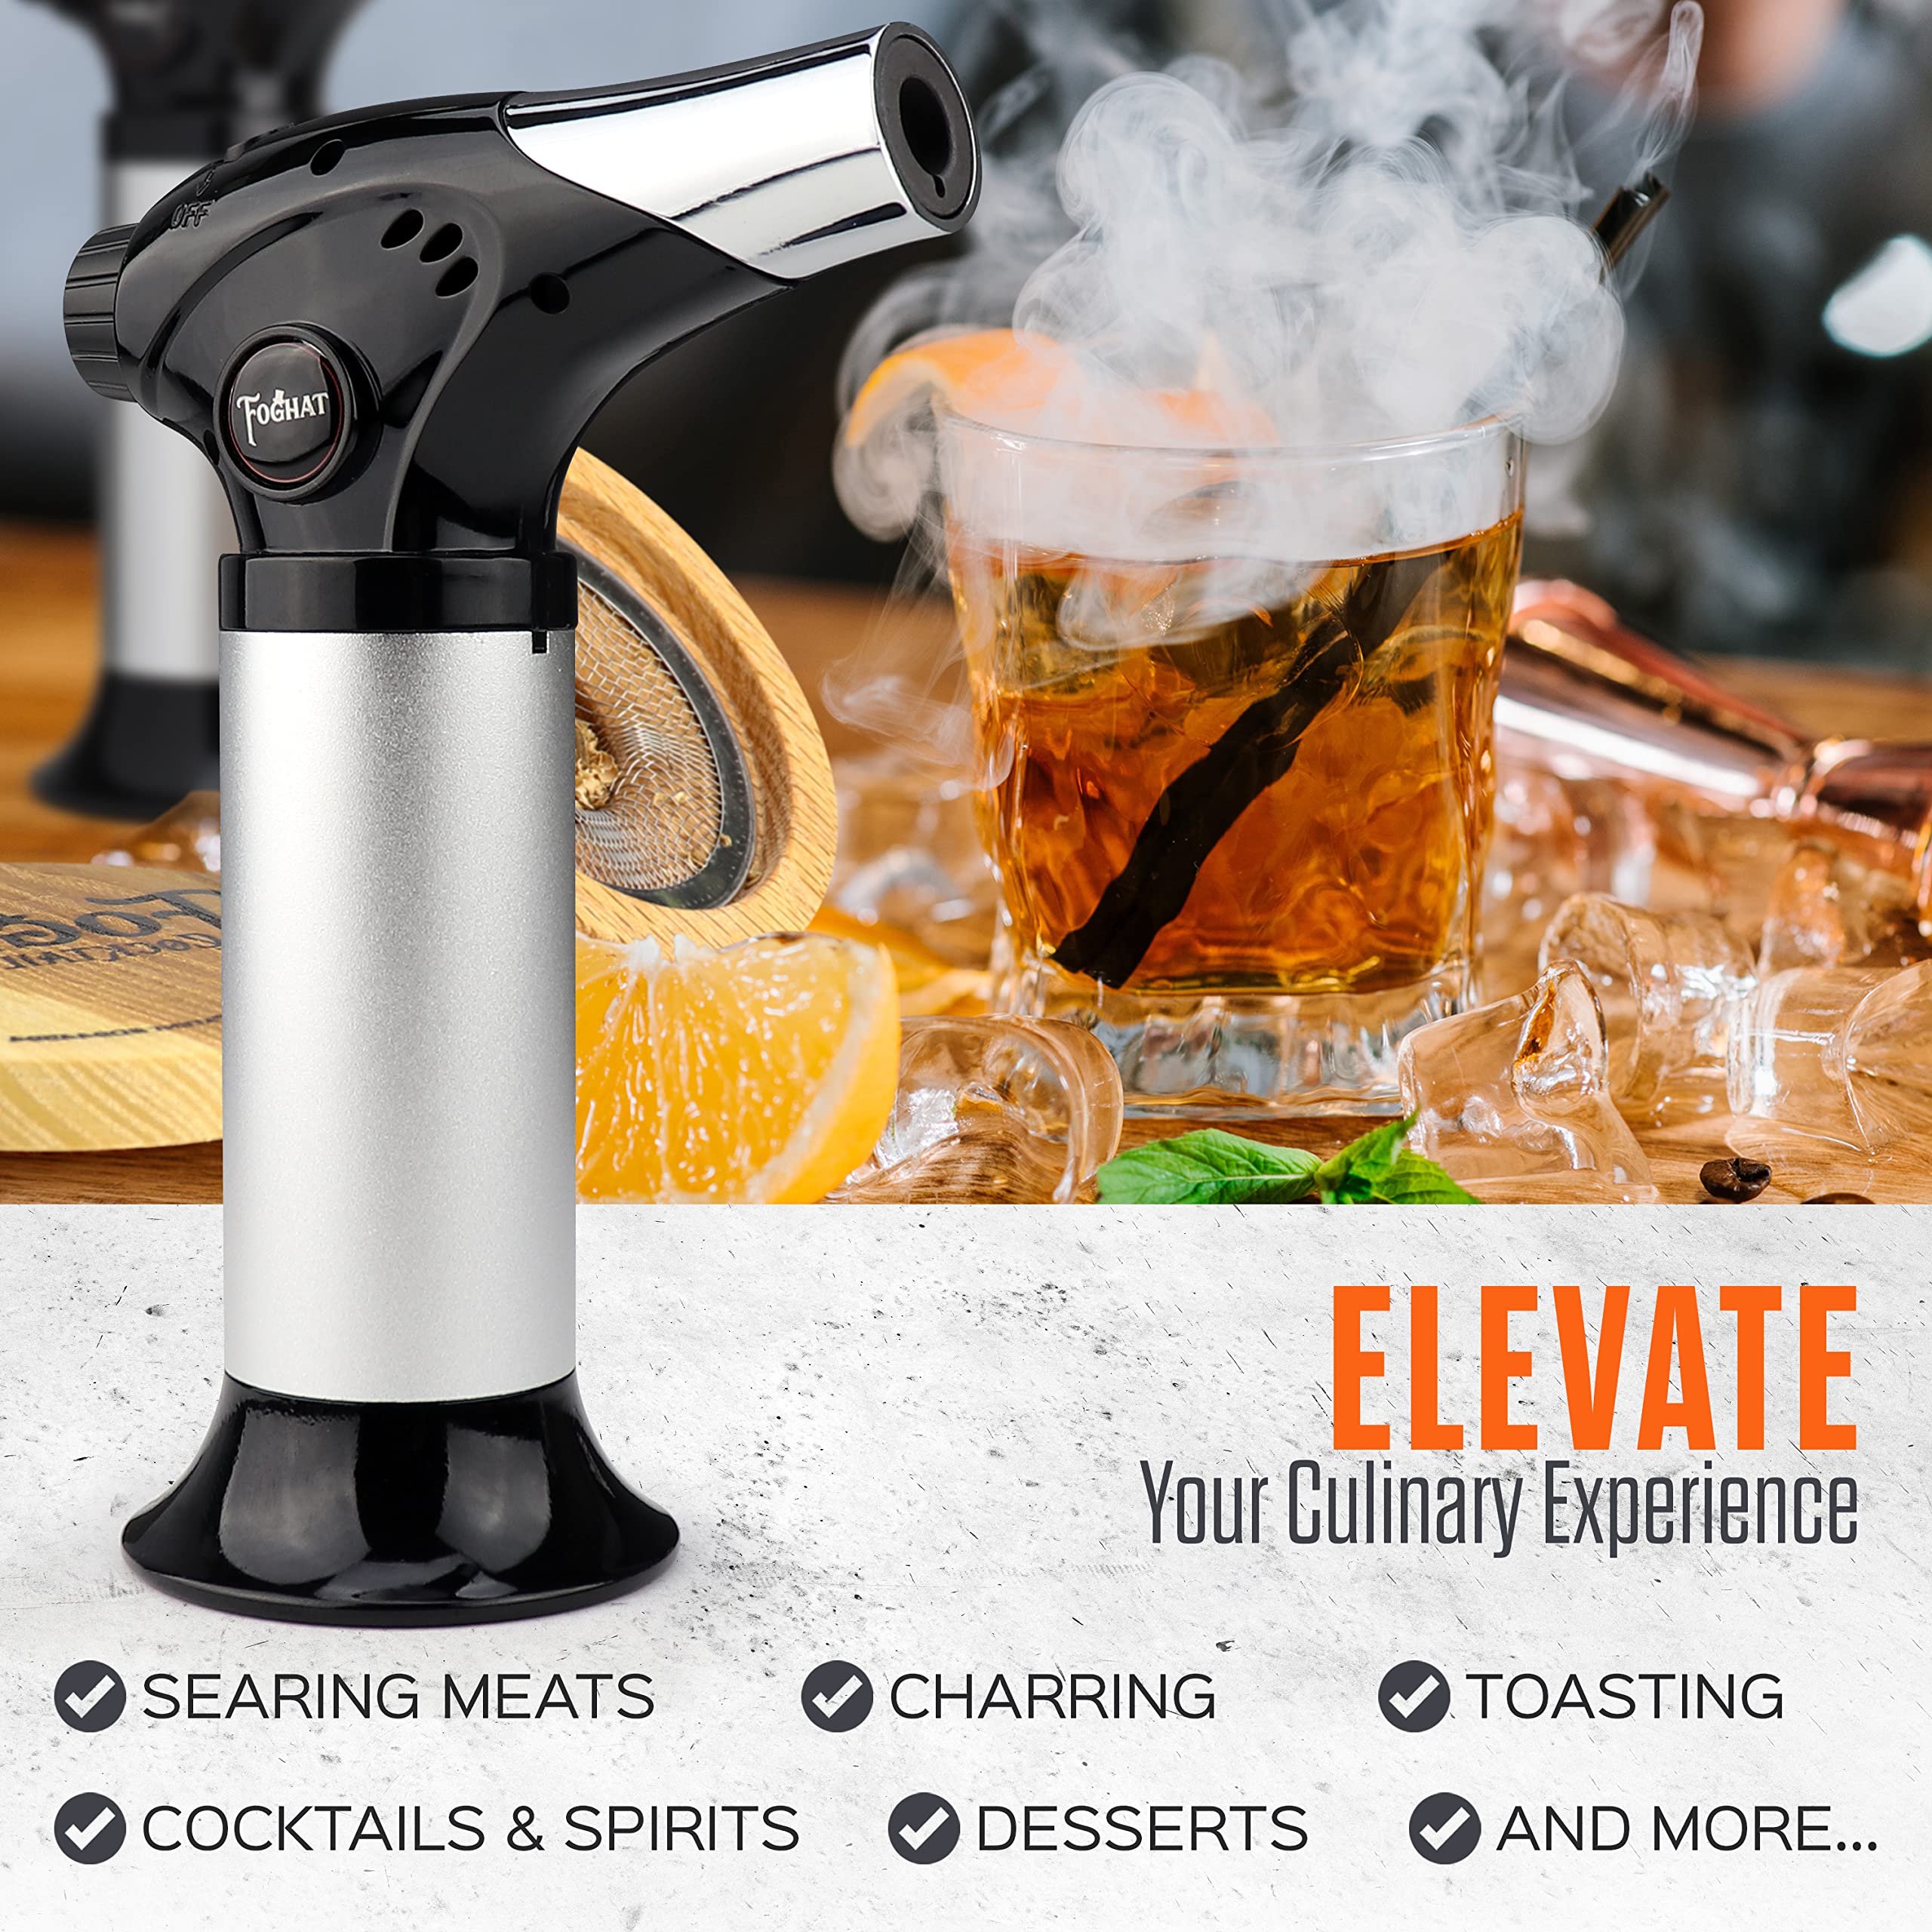 Foghat Cocktail Smoker Torch for Smoked Cocktails and Cooking - Handheld Refillable Culinary Butane Kitchen Blow Torch Lighter Gun, Creme Brulee Torch